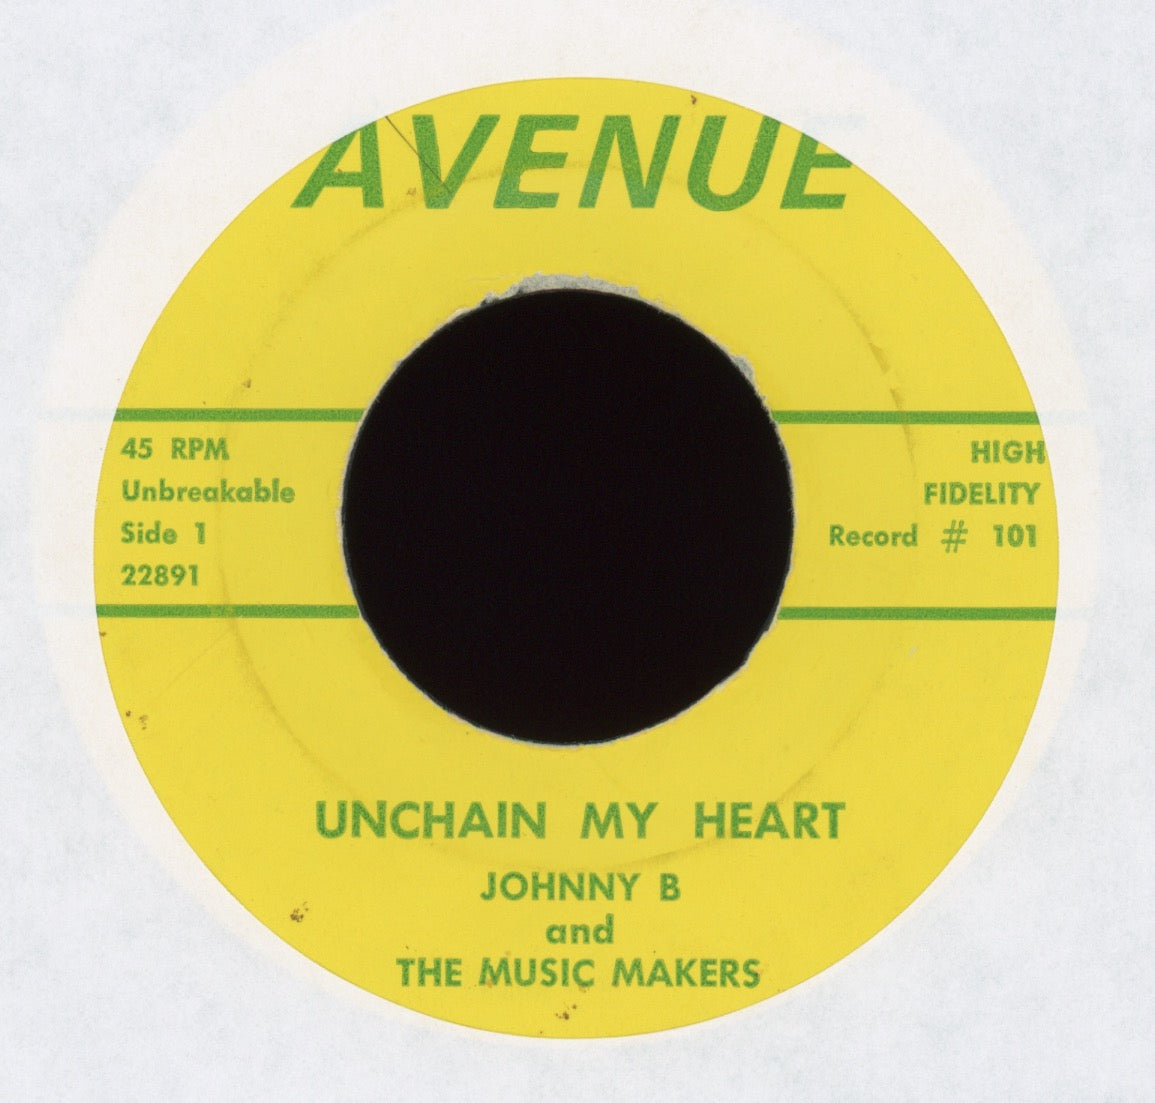 Johnny B & The Music Makers - Unchain My Heart on Avenue Rite Press